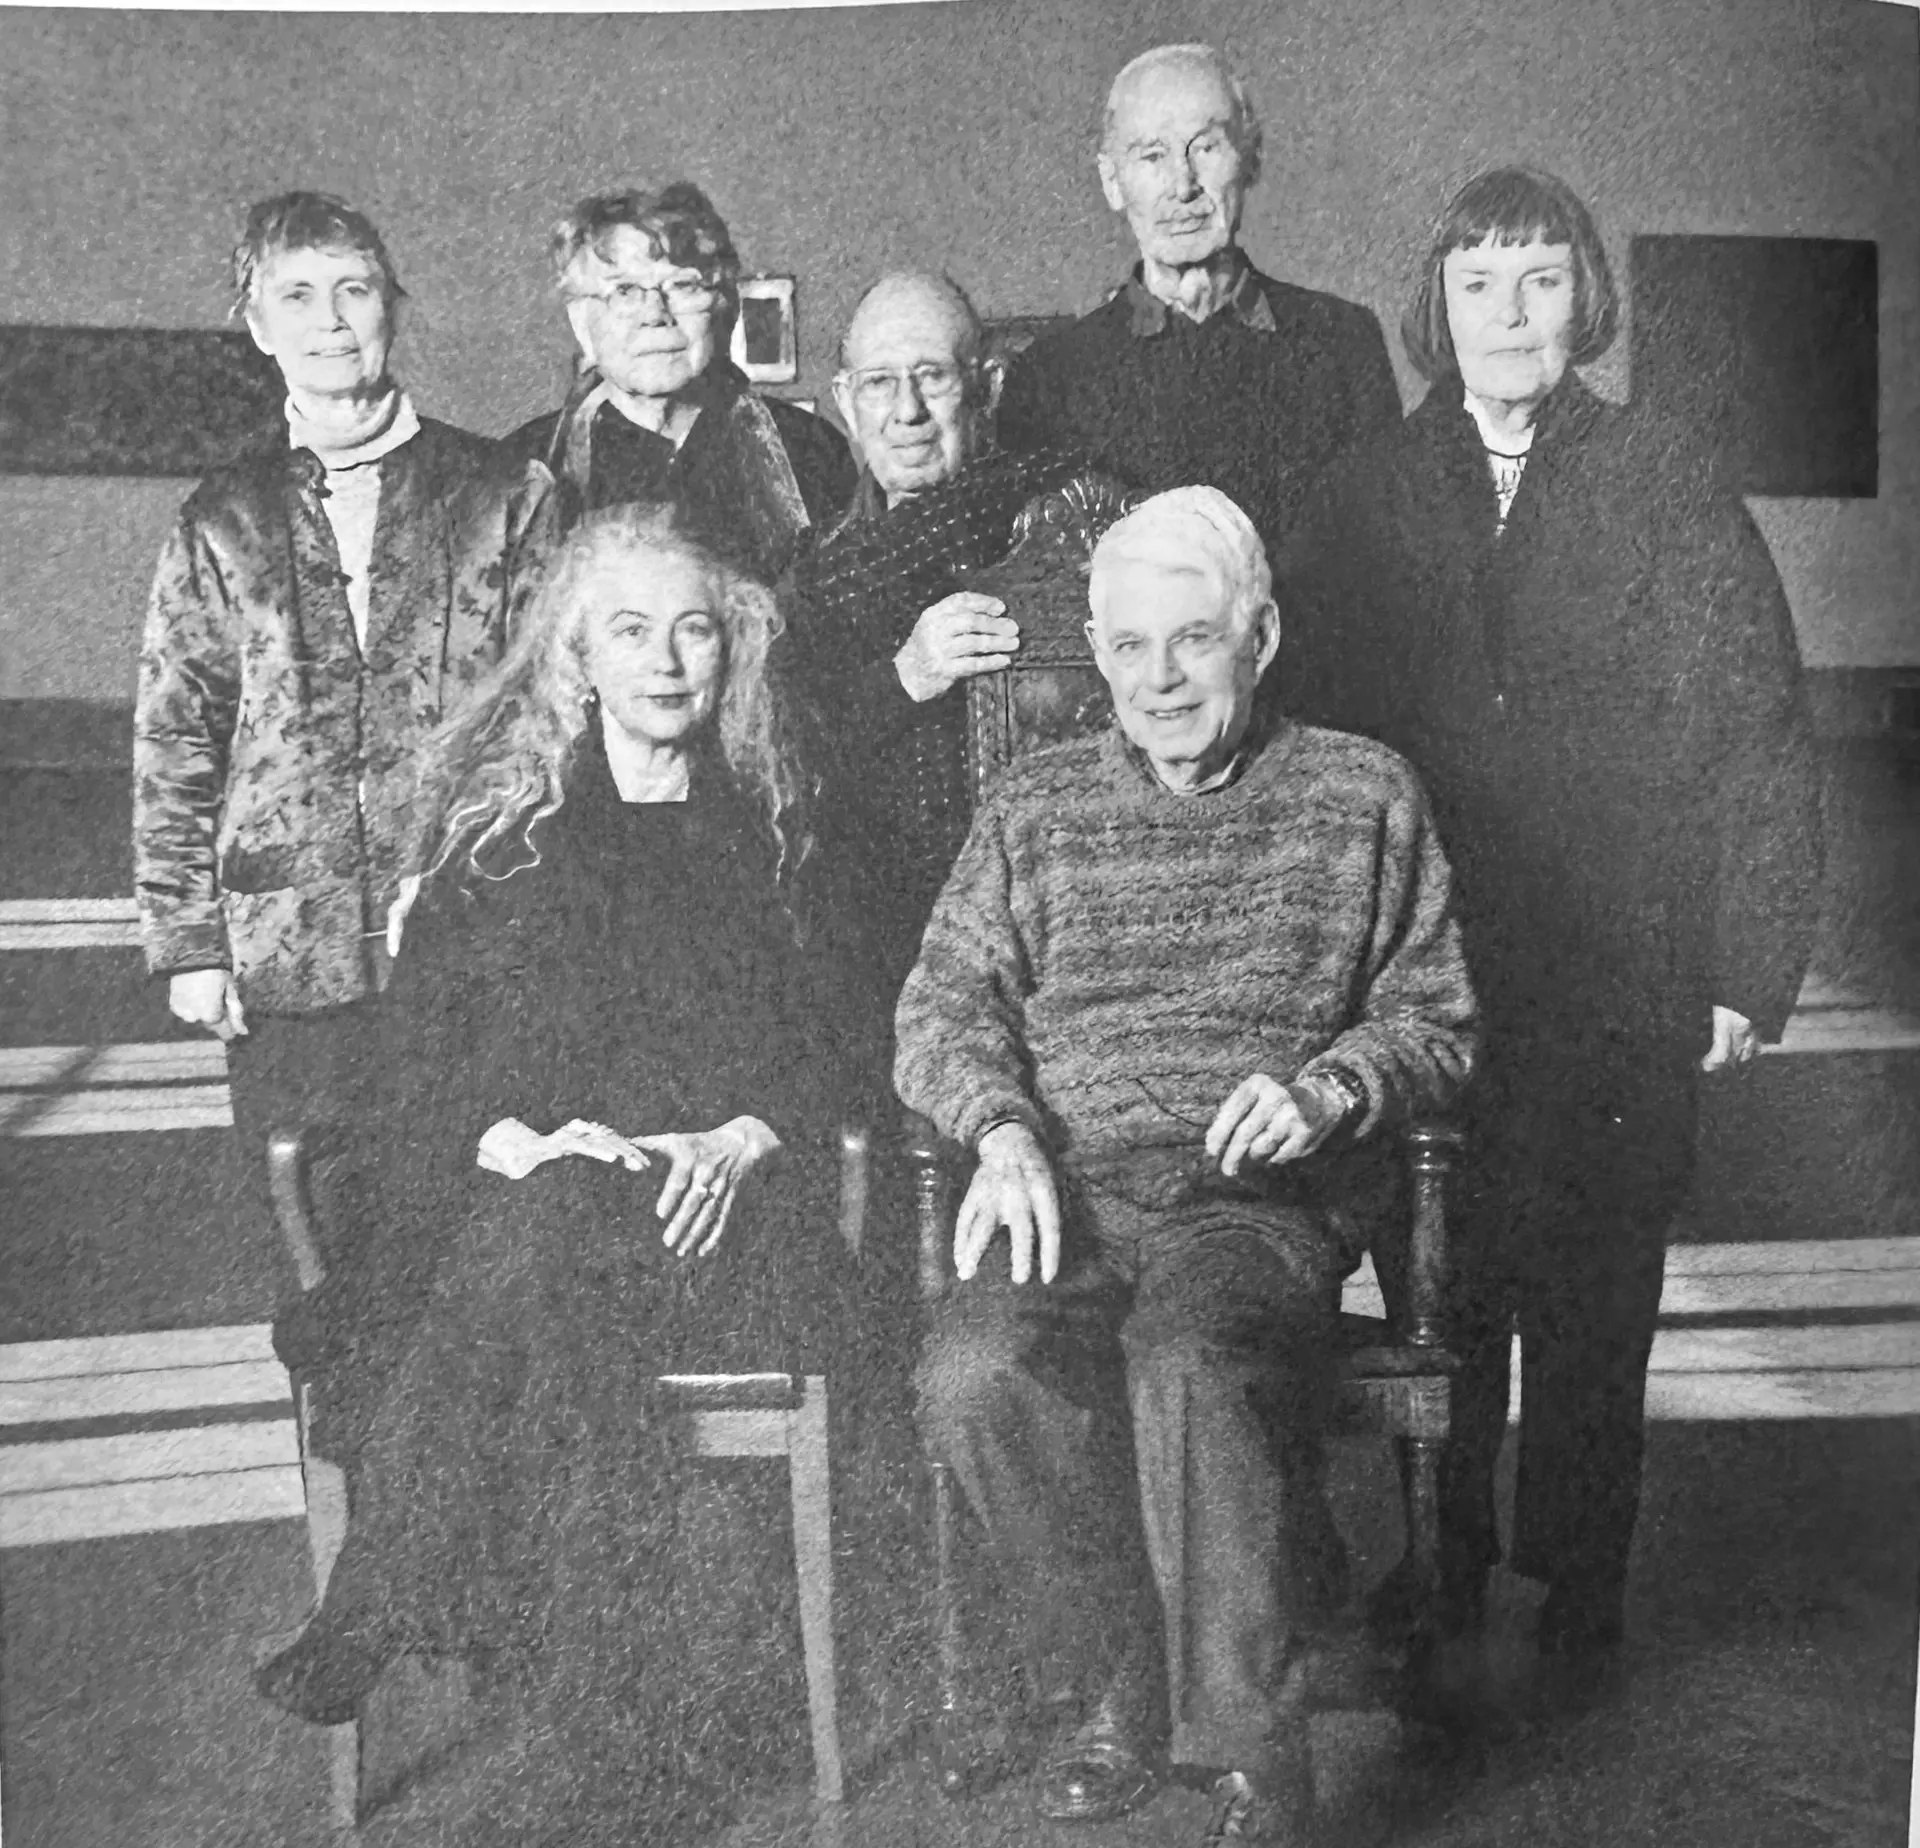 A group of people posing for a photograph. In the front, a man and woman sit beside each other in chairs. Three women and two men stand behind them.